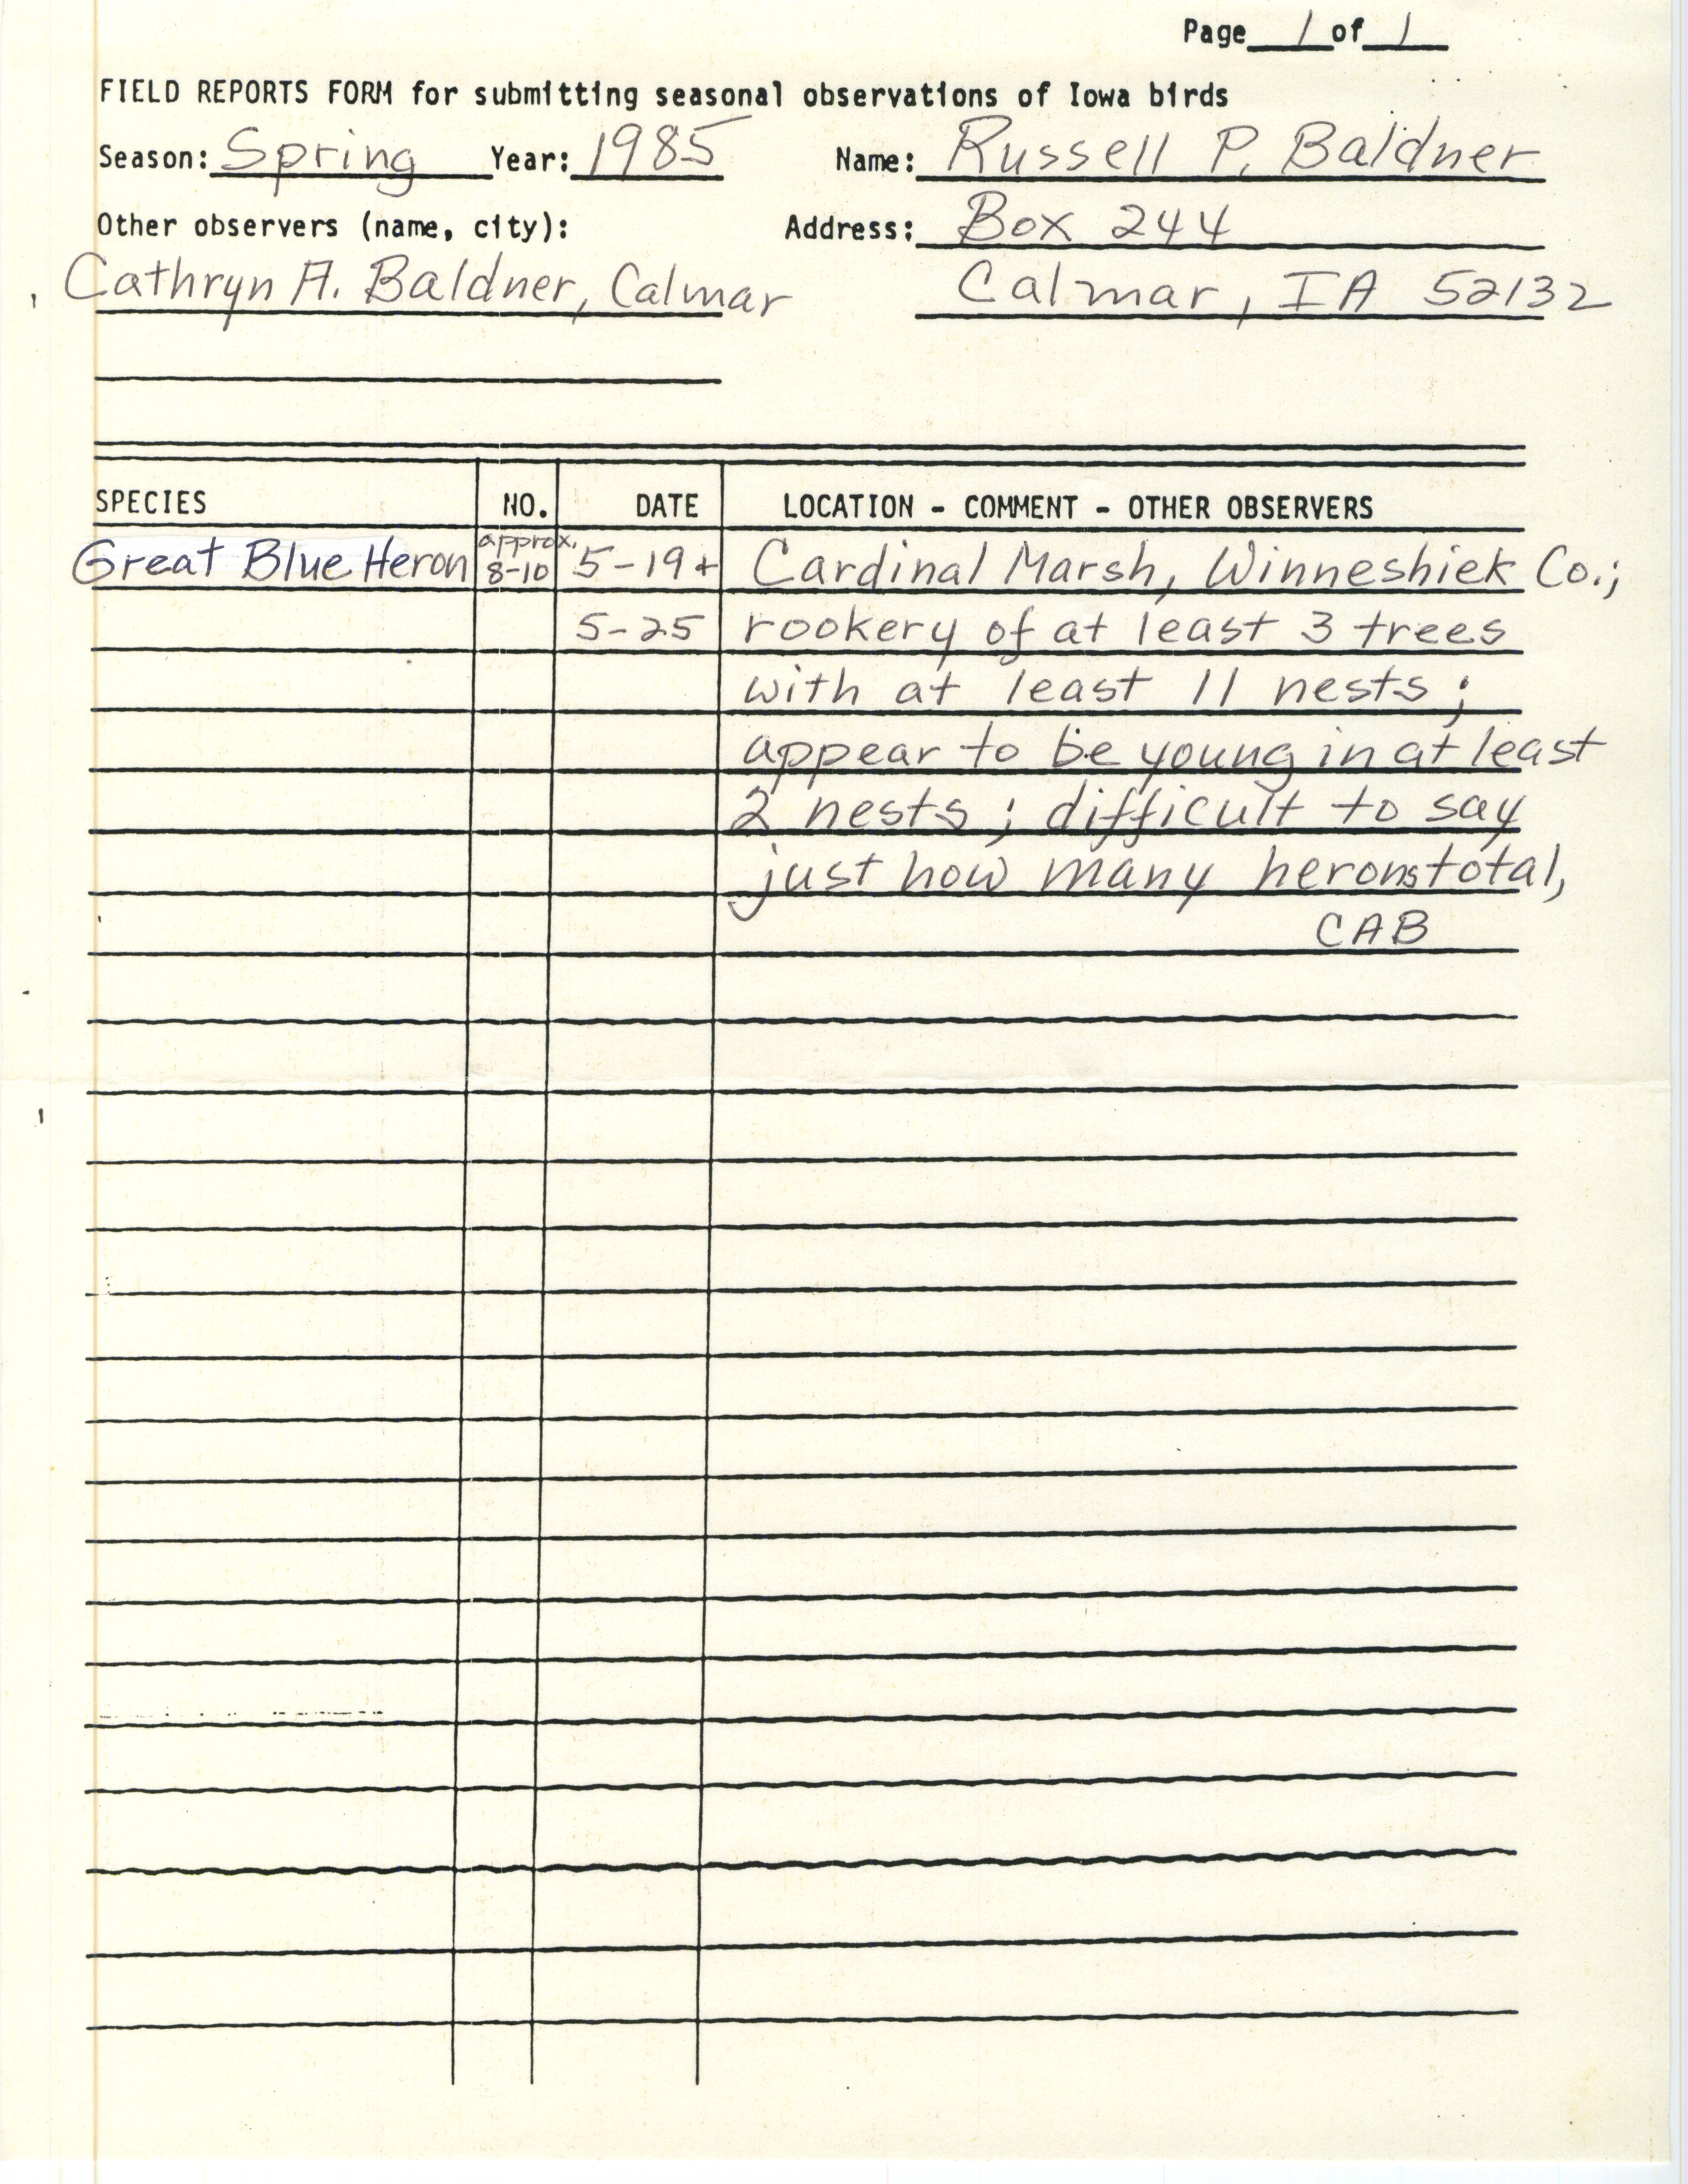 Field reports form, contributed by Russell P. Baldner and Cathryn A. Baldner, spring 1985